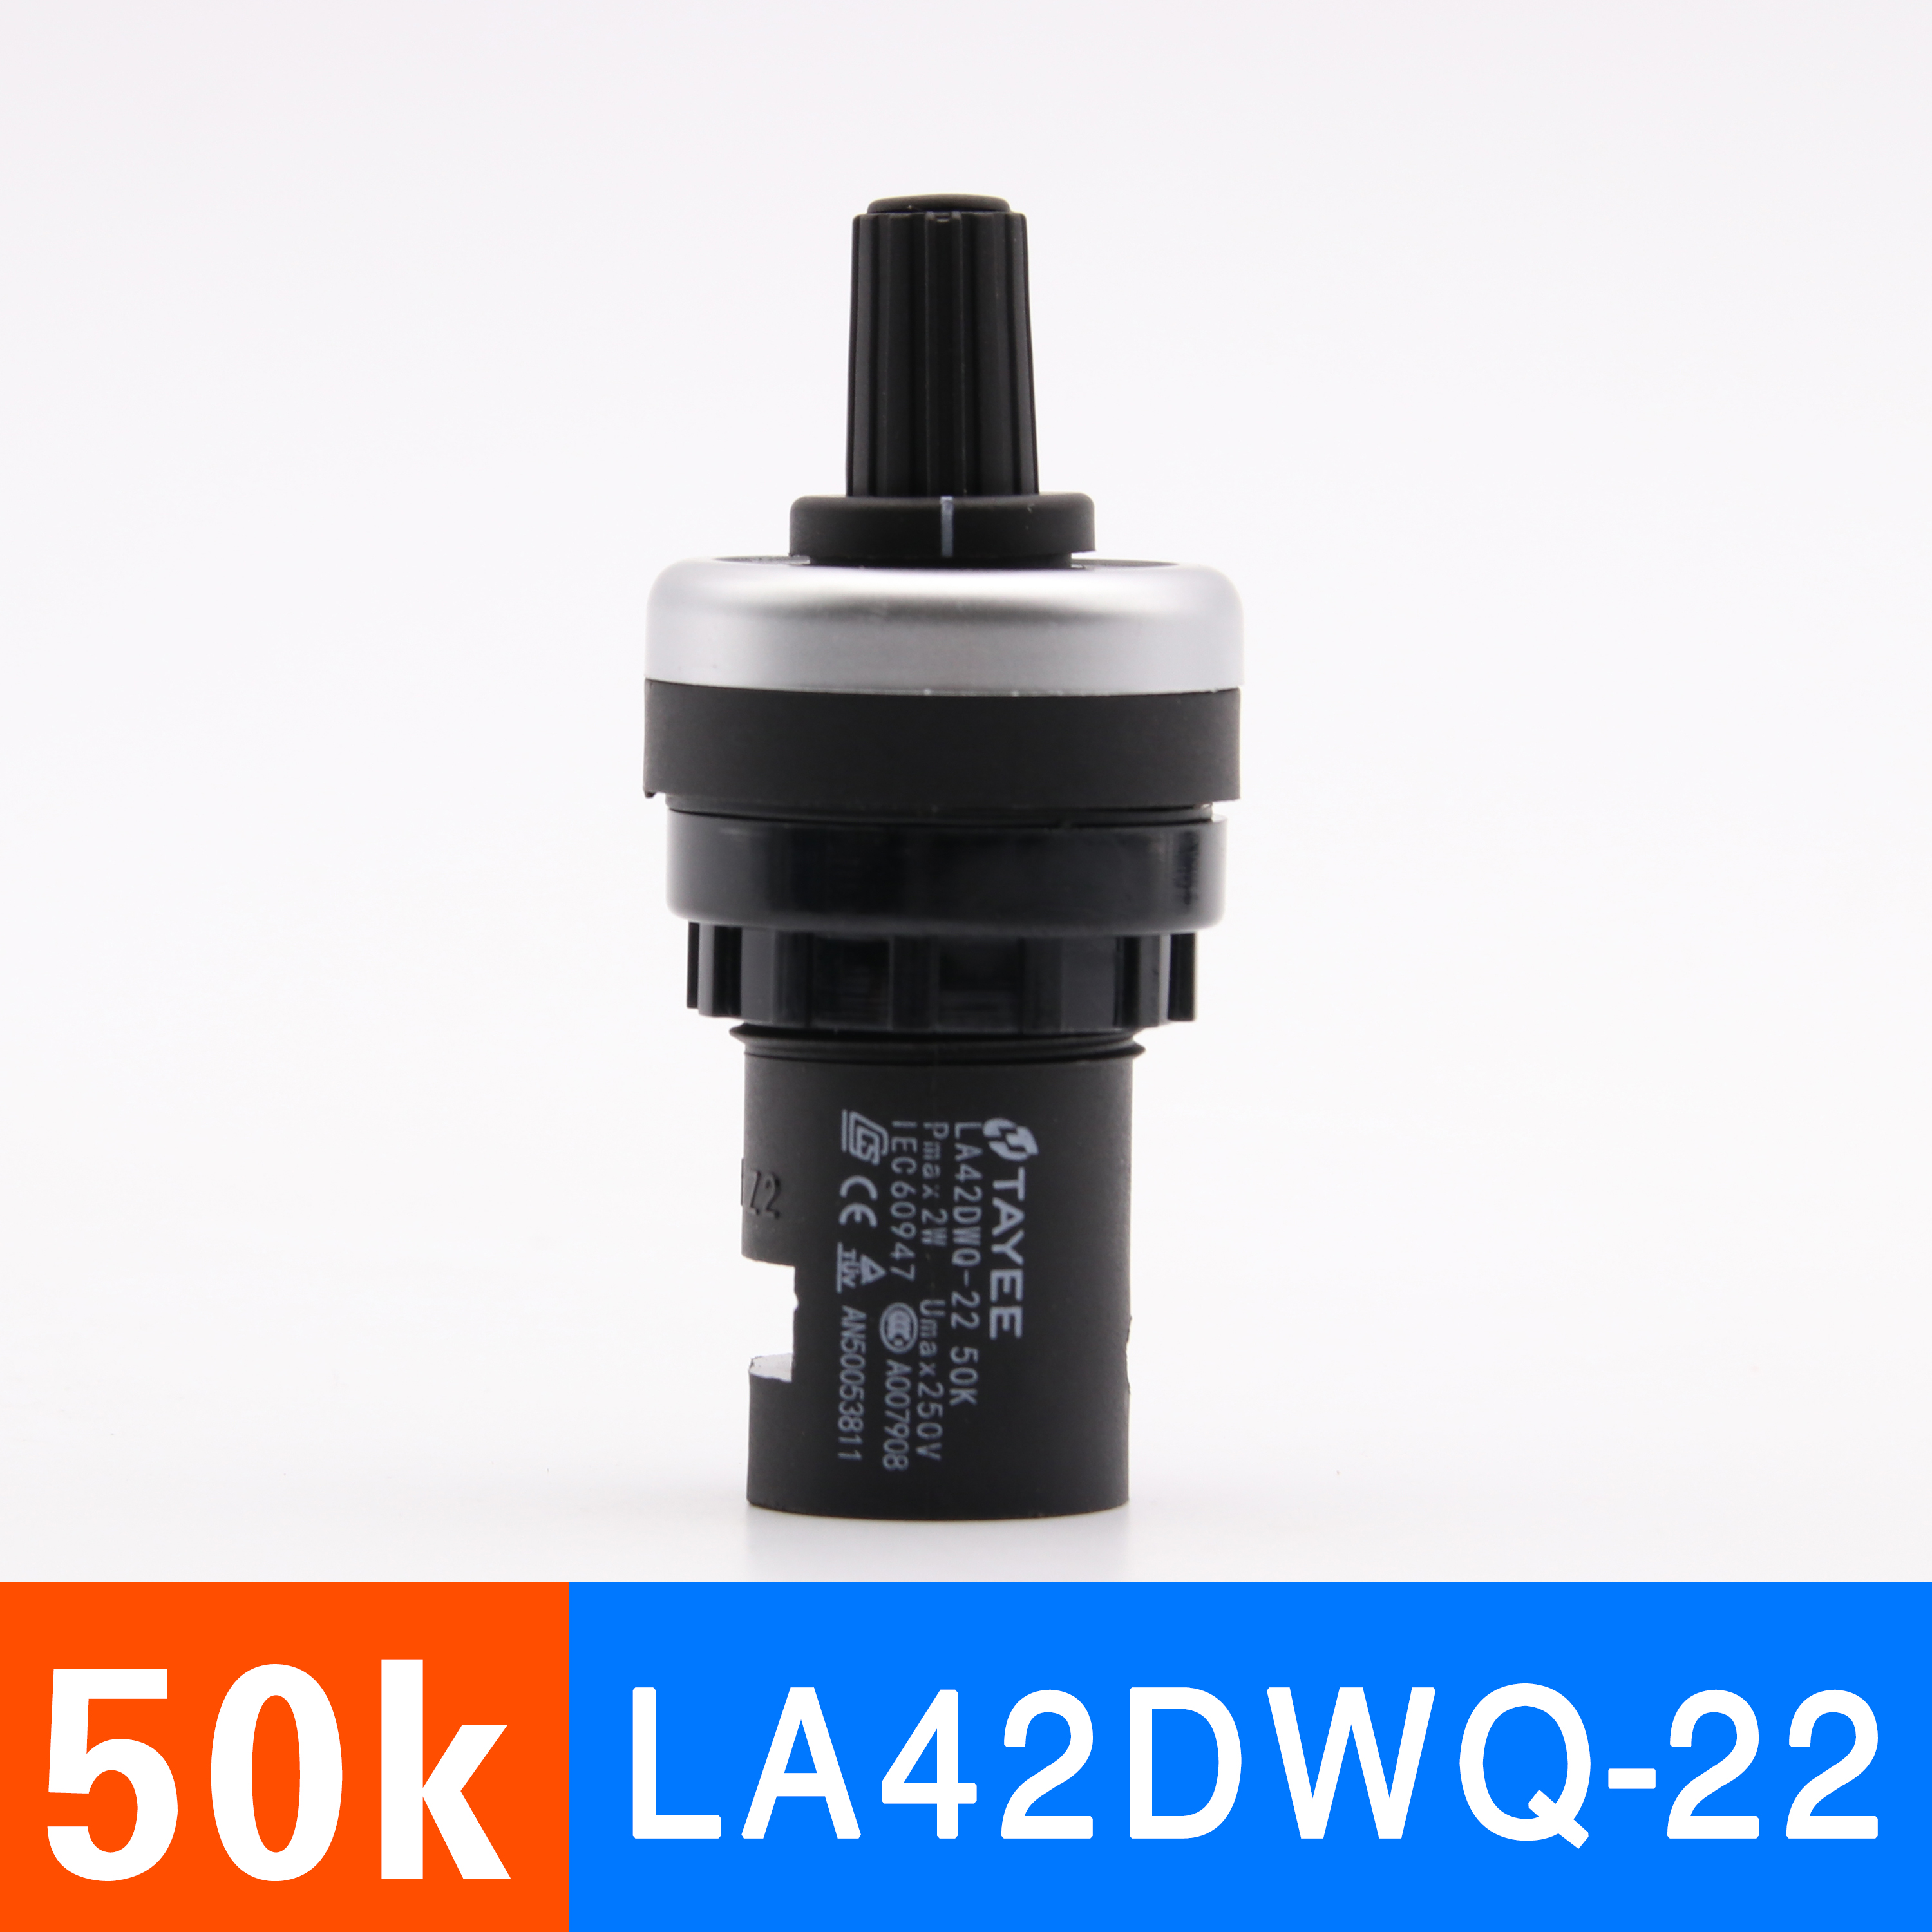 Genuine 50Kquality goods Shanghai Tianyi Frequency converter adjust speed potentiometer precise LA42DWQ-22 governor 22mm5K10K